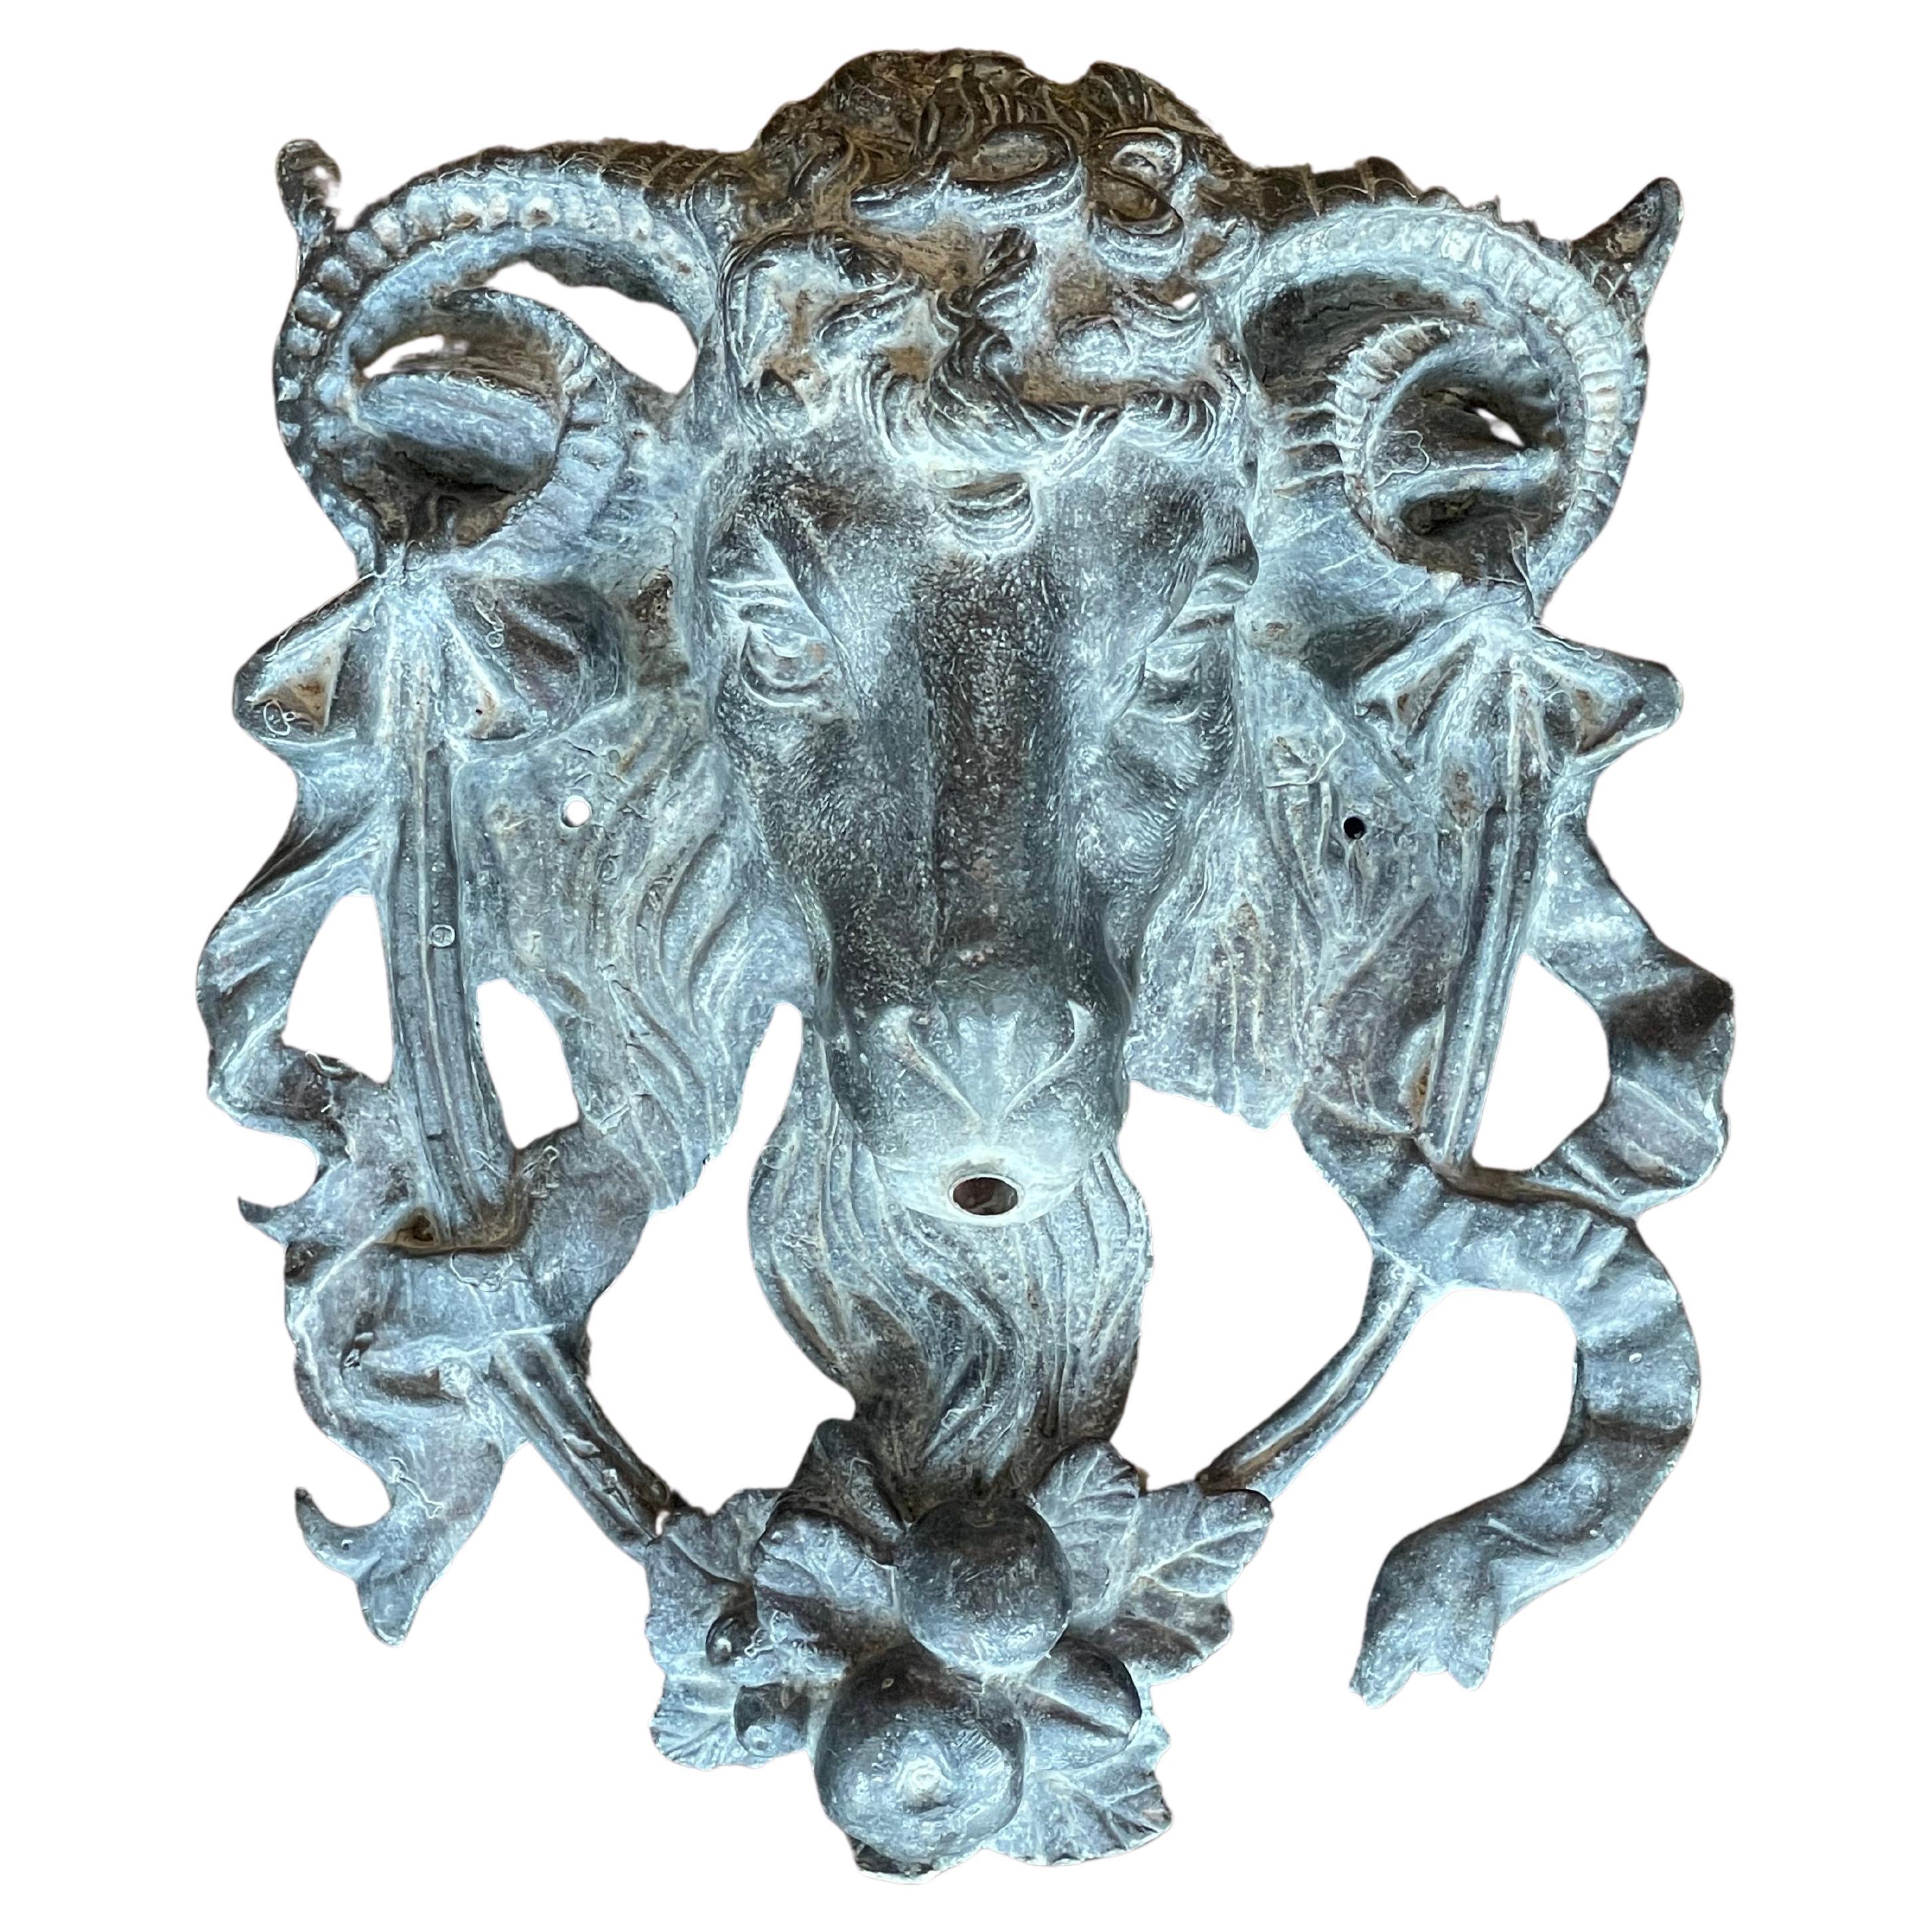 English Ornamental Ram Head Fountain
Sourced from London by Martyn Lawrence Bullard
Fitted with wall mount.
Graded for indoor or outdoor use.
